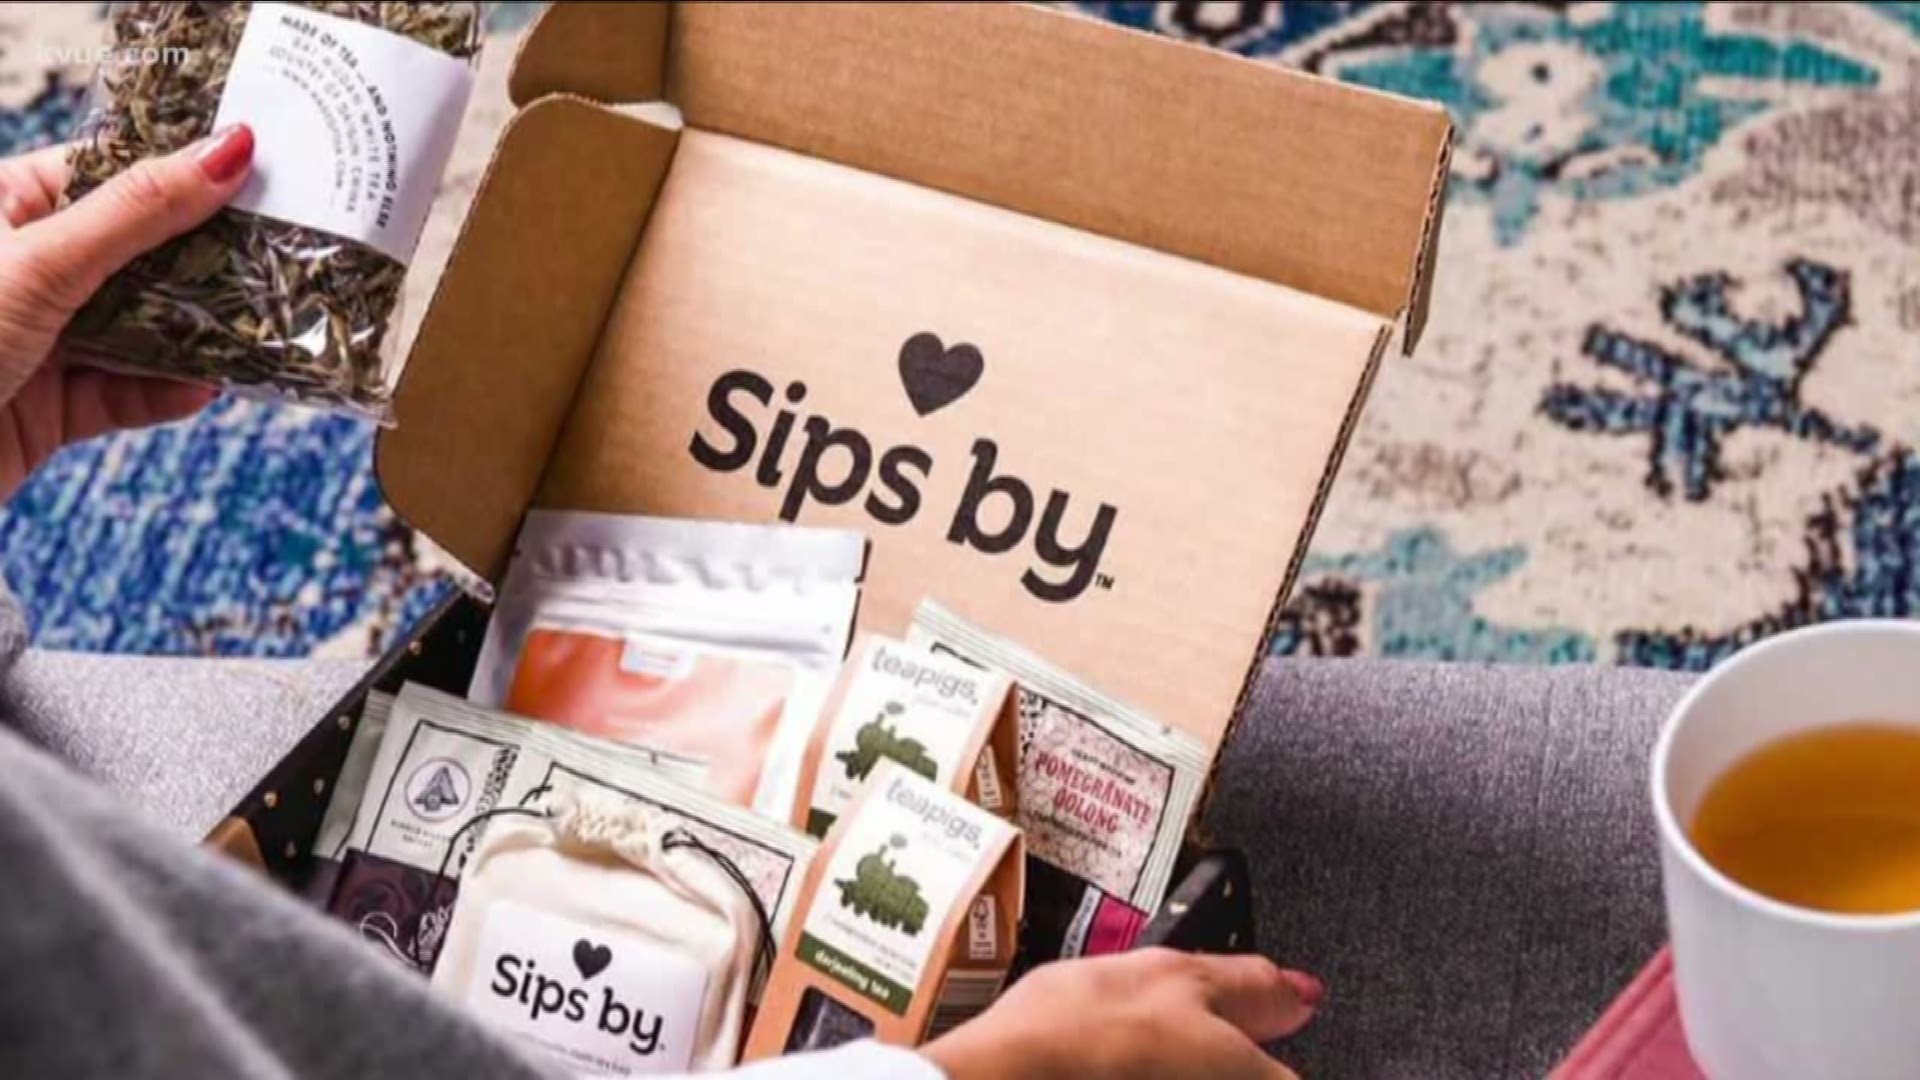 It's time for Made in Austin where we feature locally-grown companies. Joining KVUE is Sips By, a female-founded and led Austin-based startup that makes discovering tea fun. It's the only multi-brand, personalized subscription box. Founder Staci Brinkman is here to talk about it.